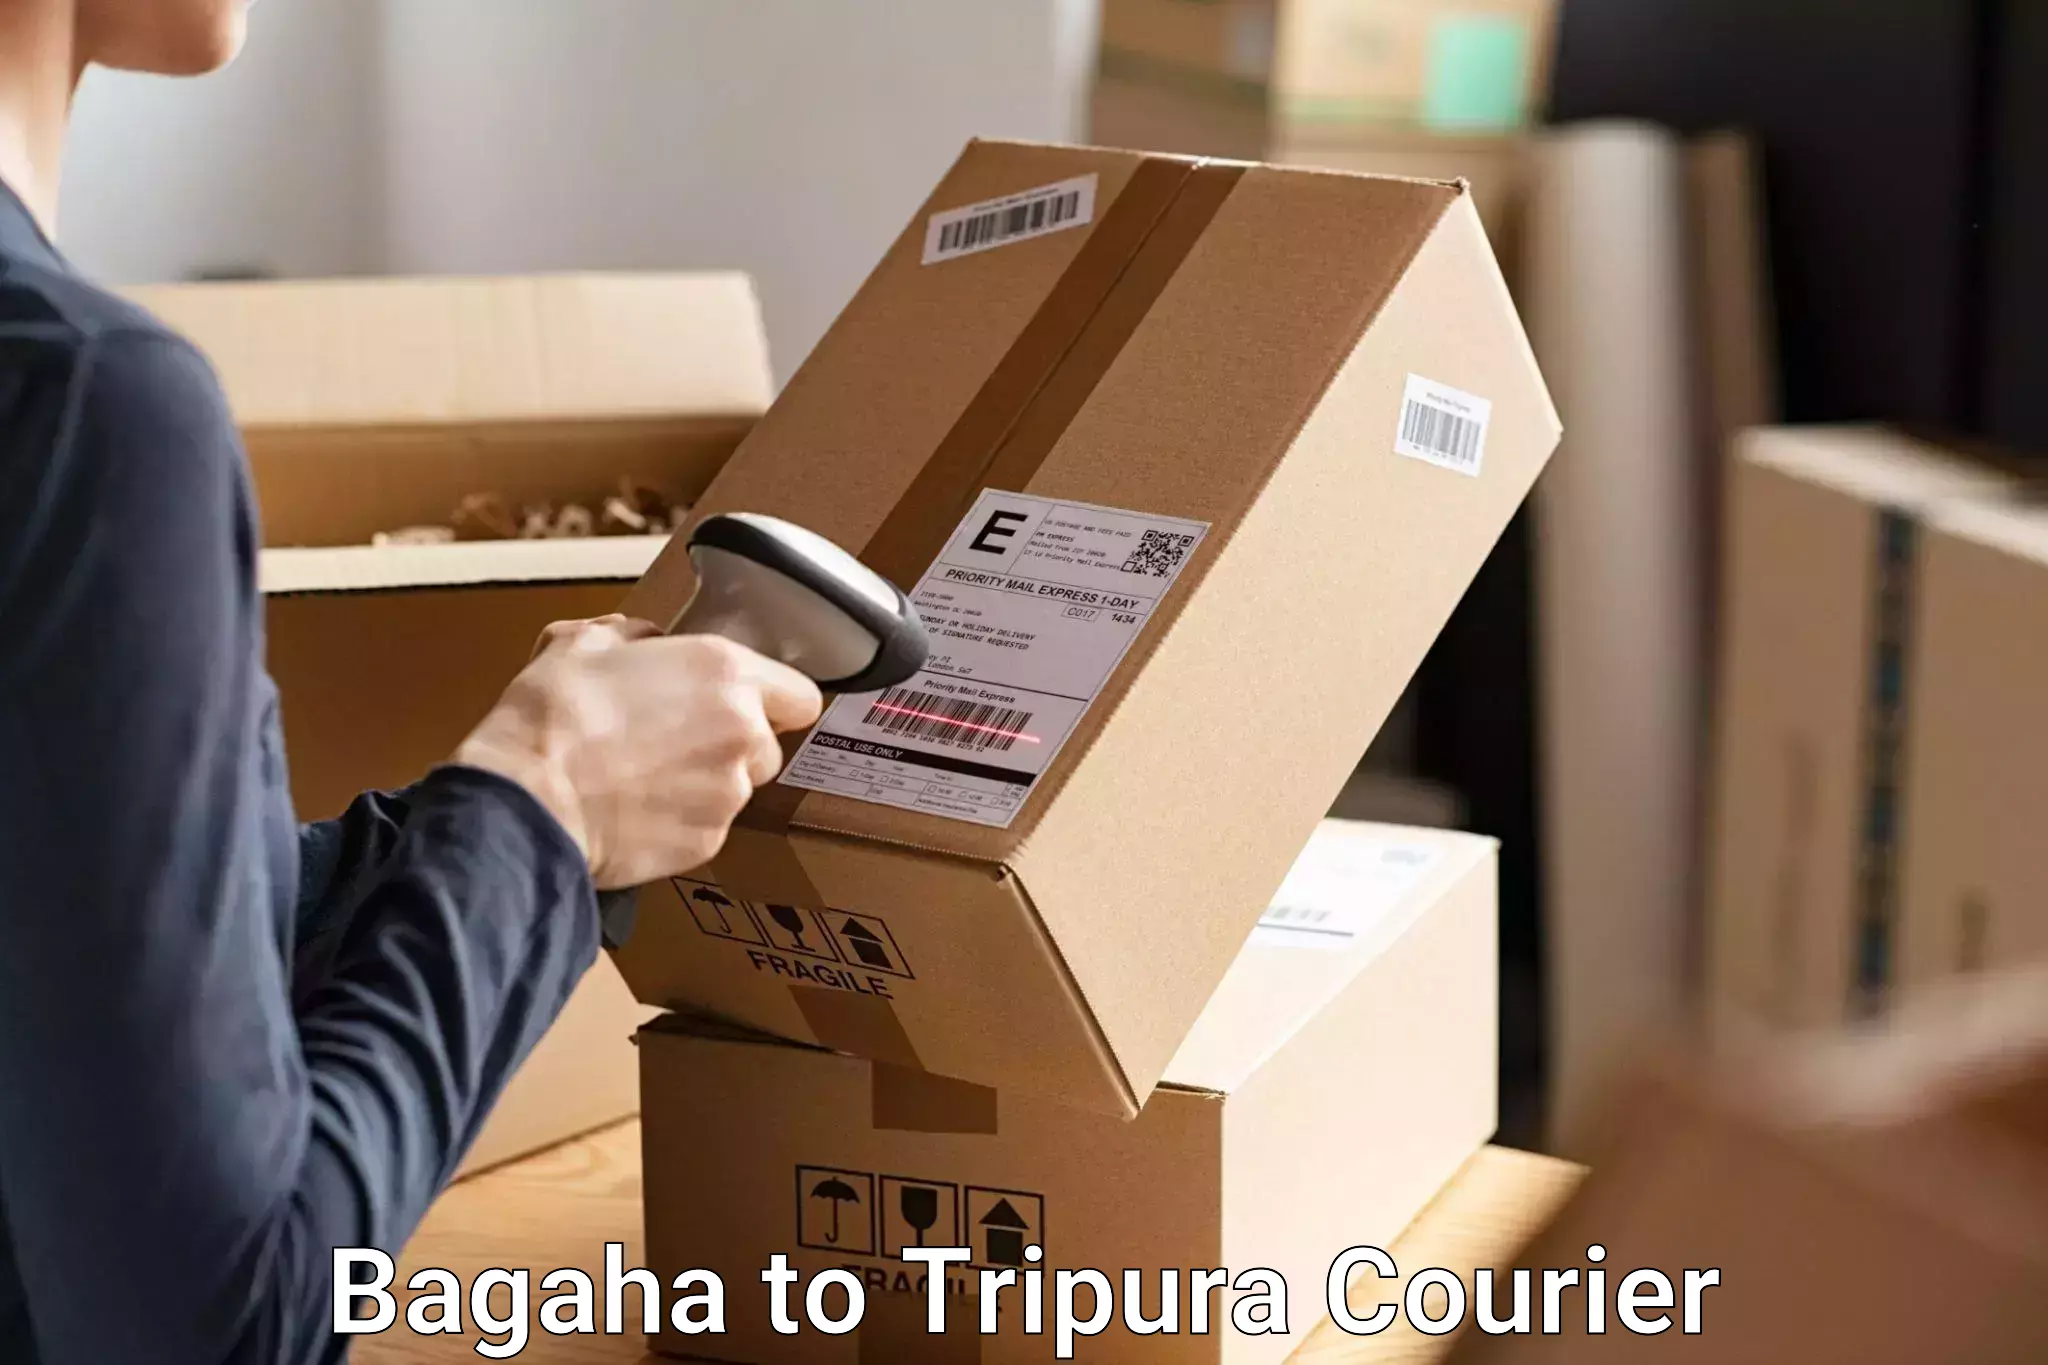 Baggage transport services in Bagaha to South Tripura